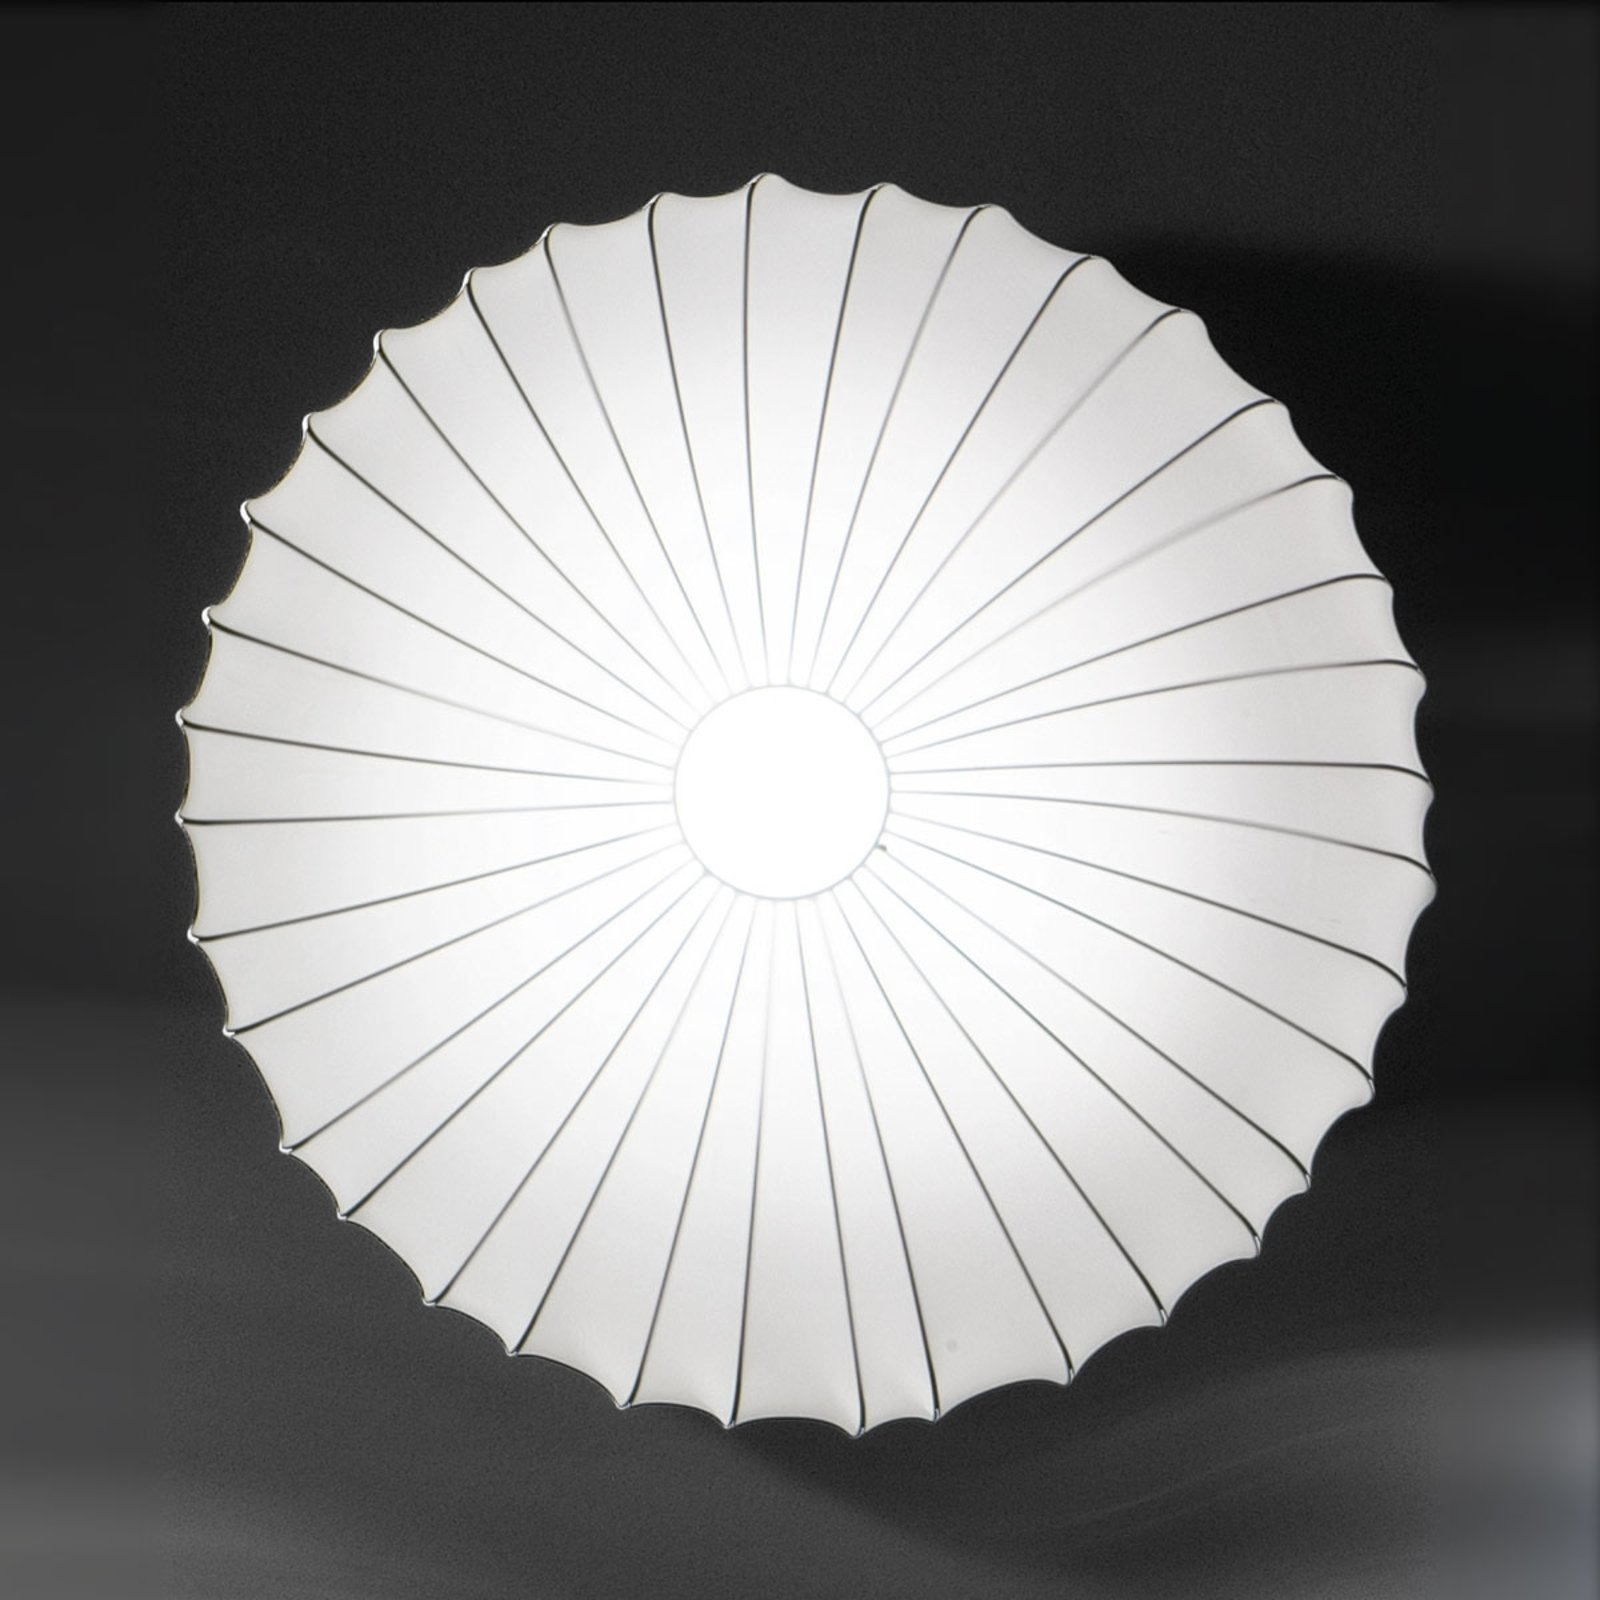 Axolight Muse wall light in white